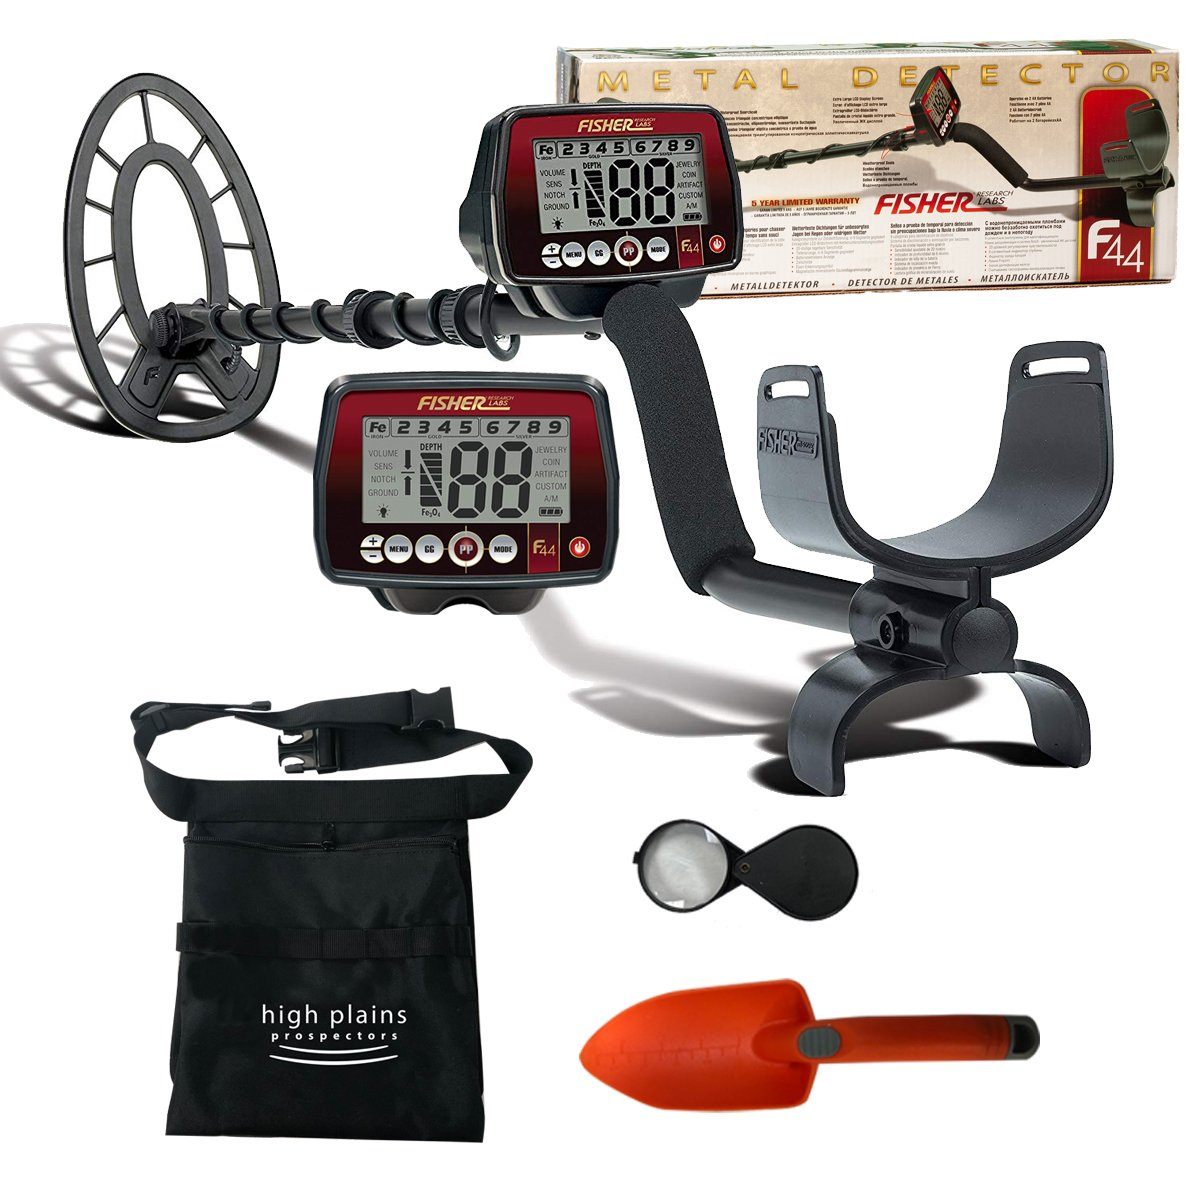 Fisher F44 Weatherproof Metal Detector with Extra Free Gear